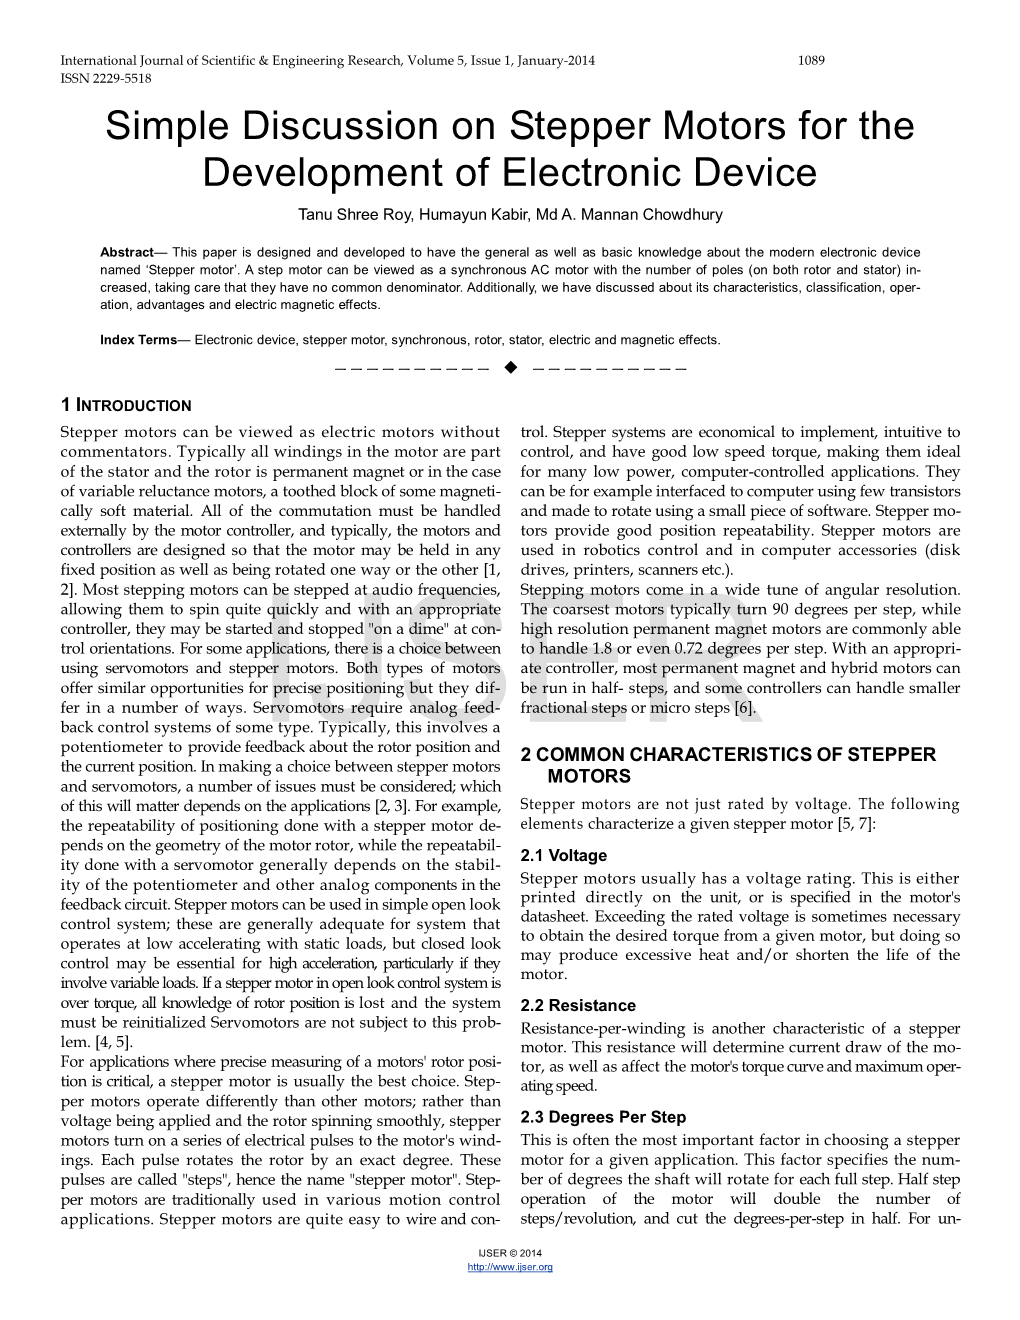 Simple Discussion on Stepper Motors for the Development of Electronic